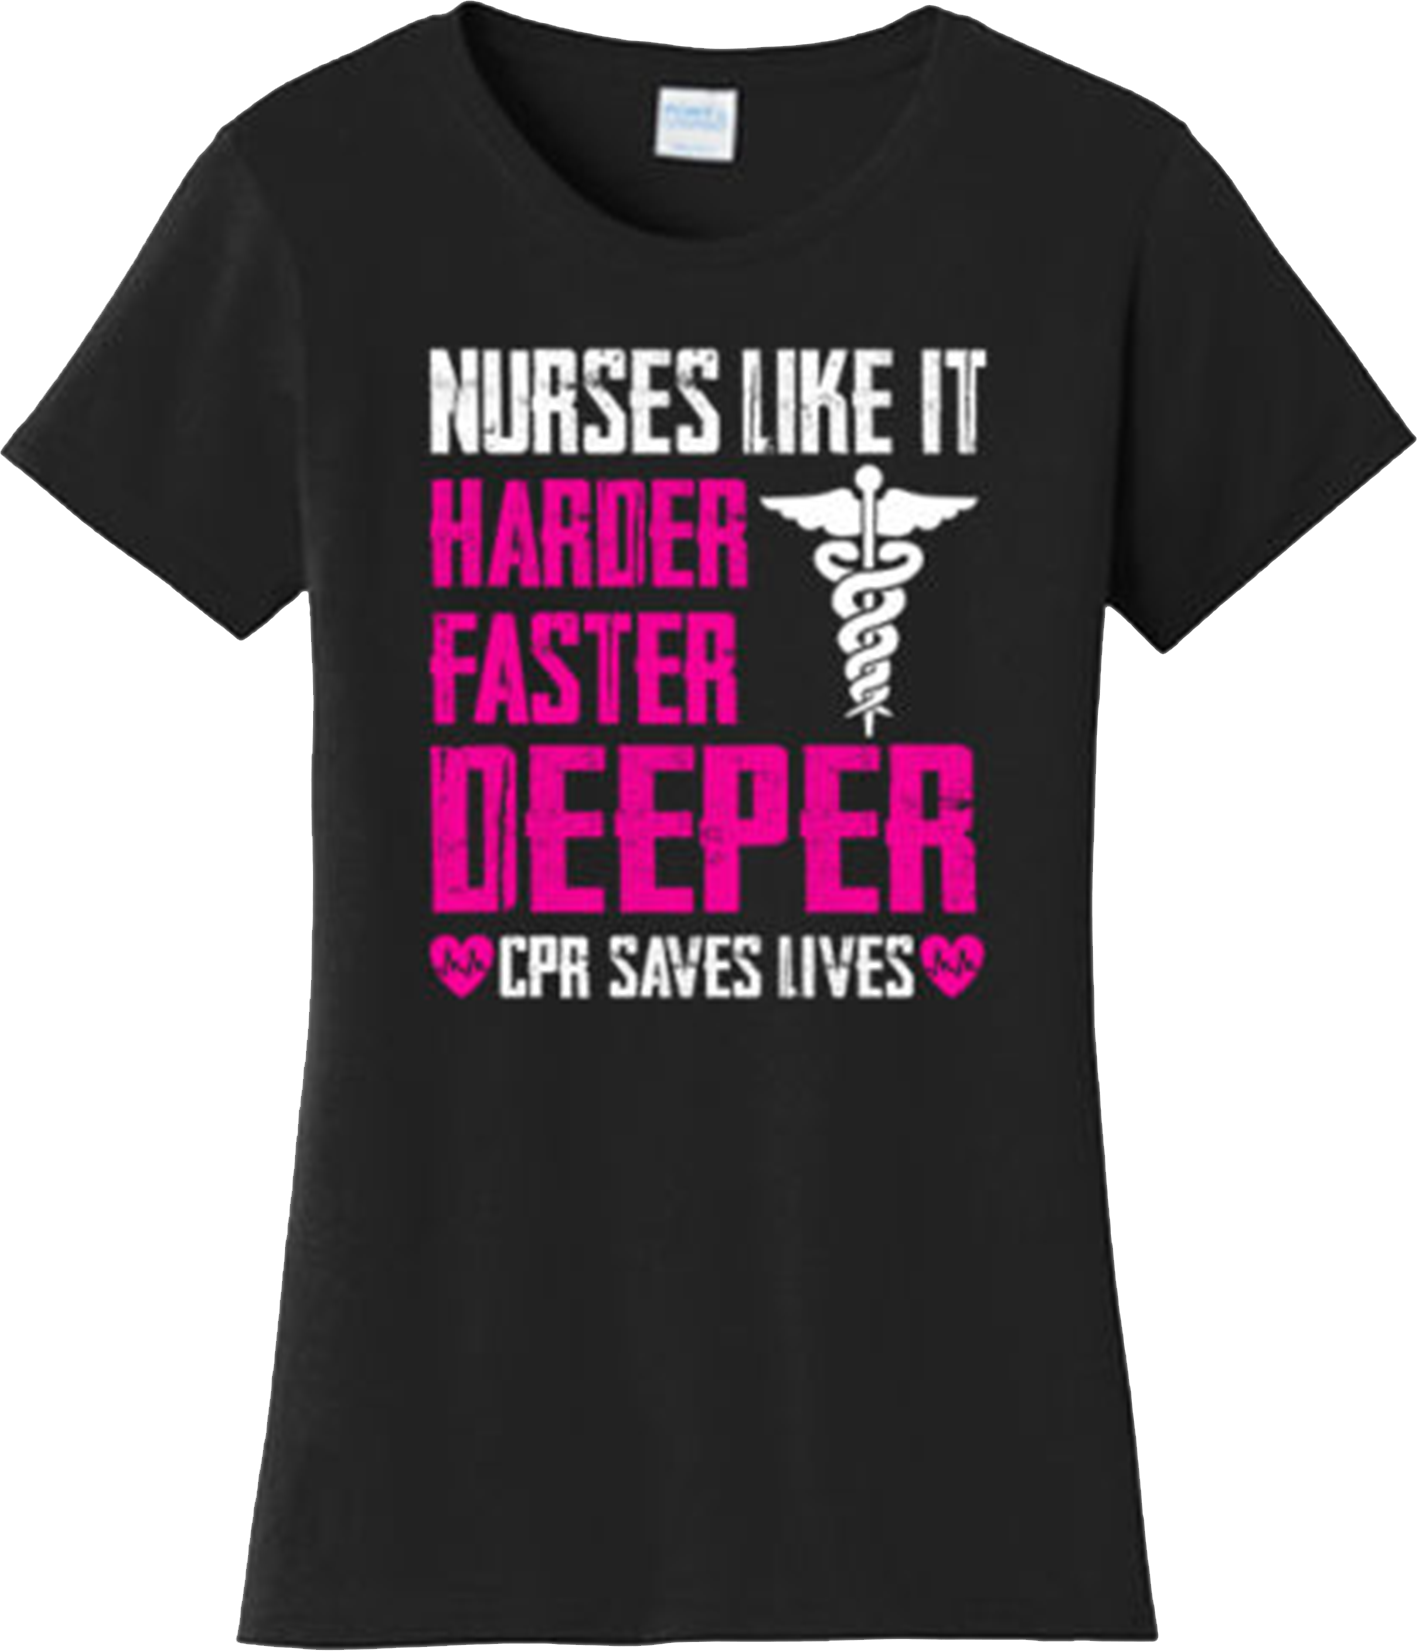 Funny Nurses Like It Harder Faster Deeper Adult Humor T Shirt New Graphic Tee